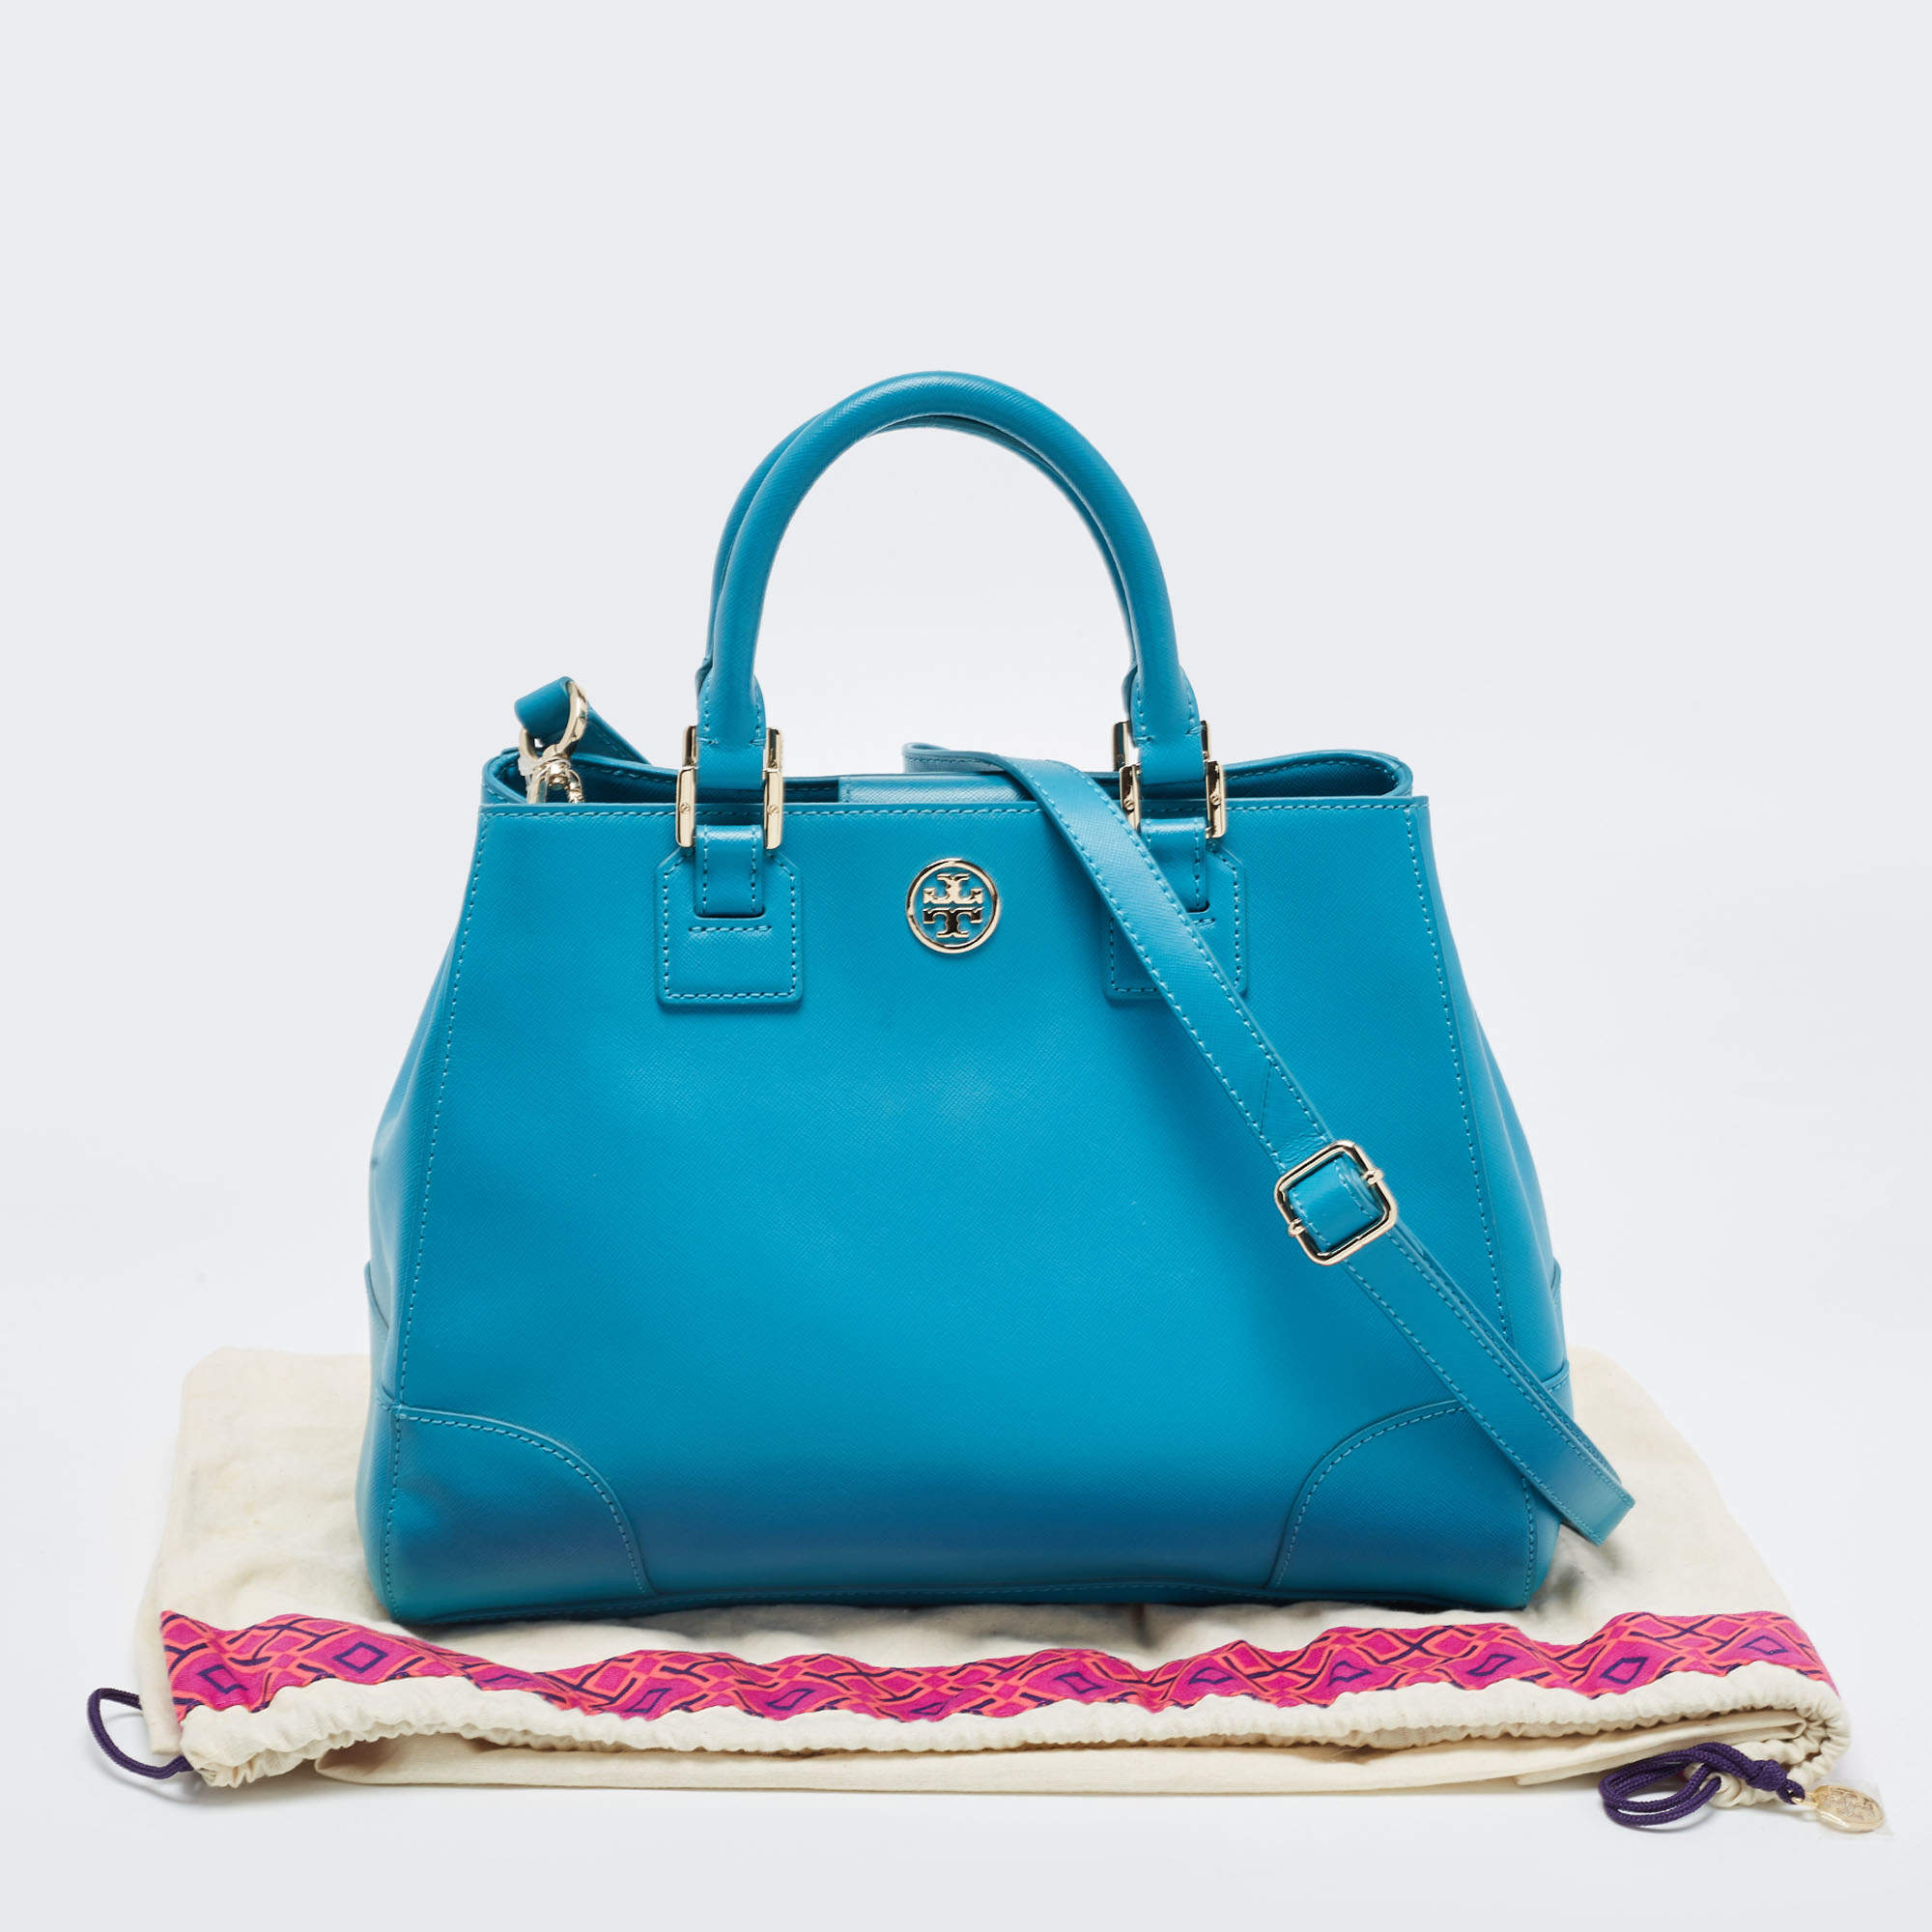 Tory Burch Teal Blue Saffiano Leather Robinson Tote Tory Burch